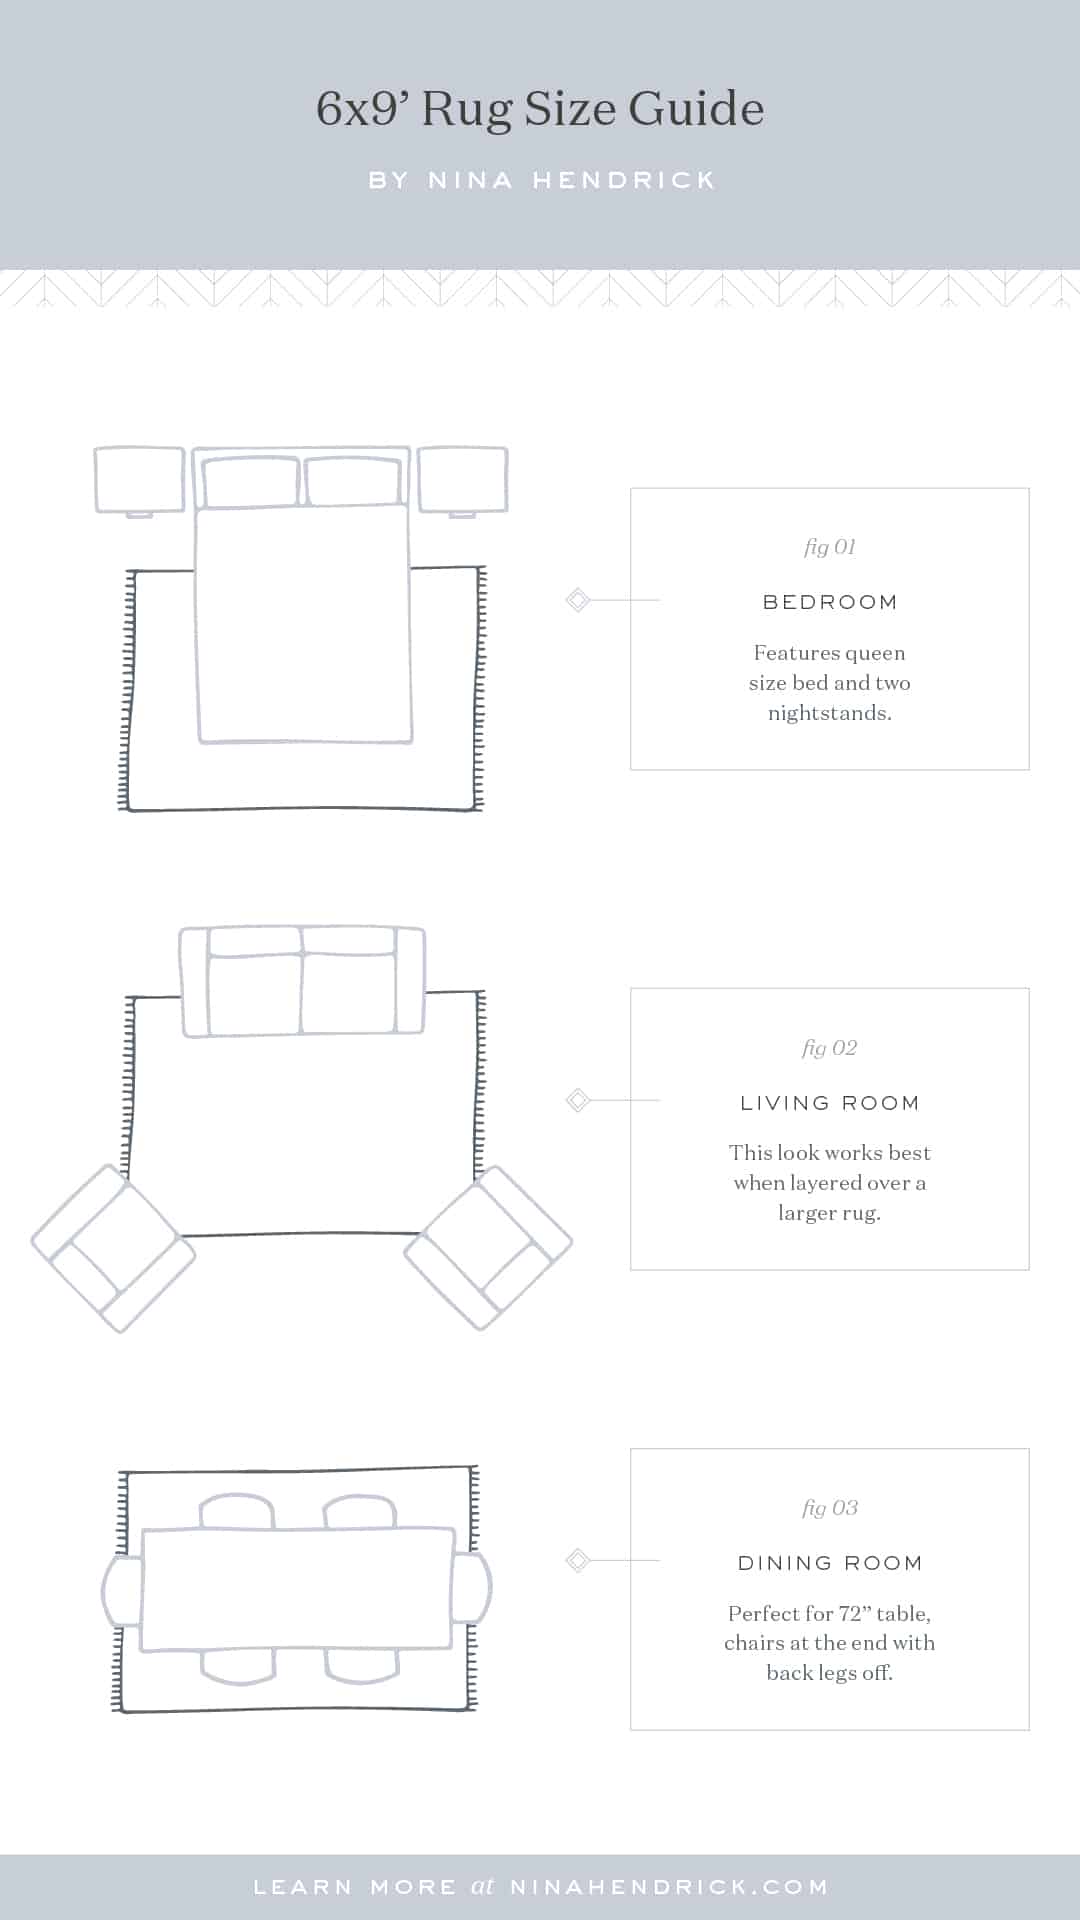 6x9' size area rug size guide graphic with tips for furniture placement in a bedroom, living room, and dining room